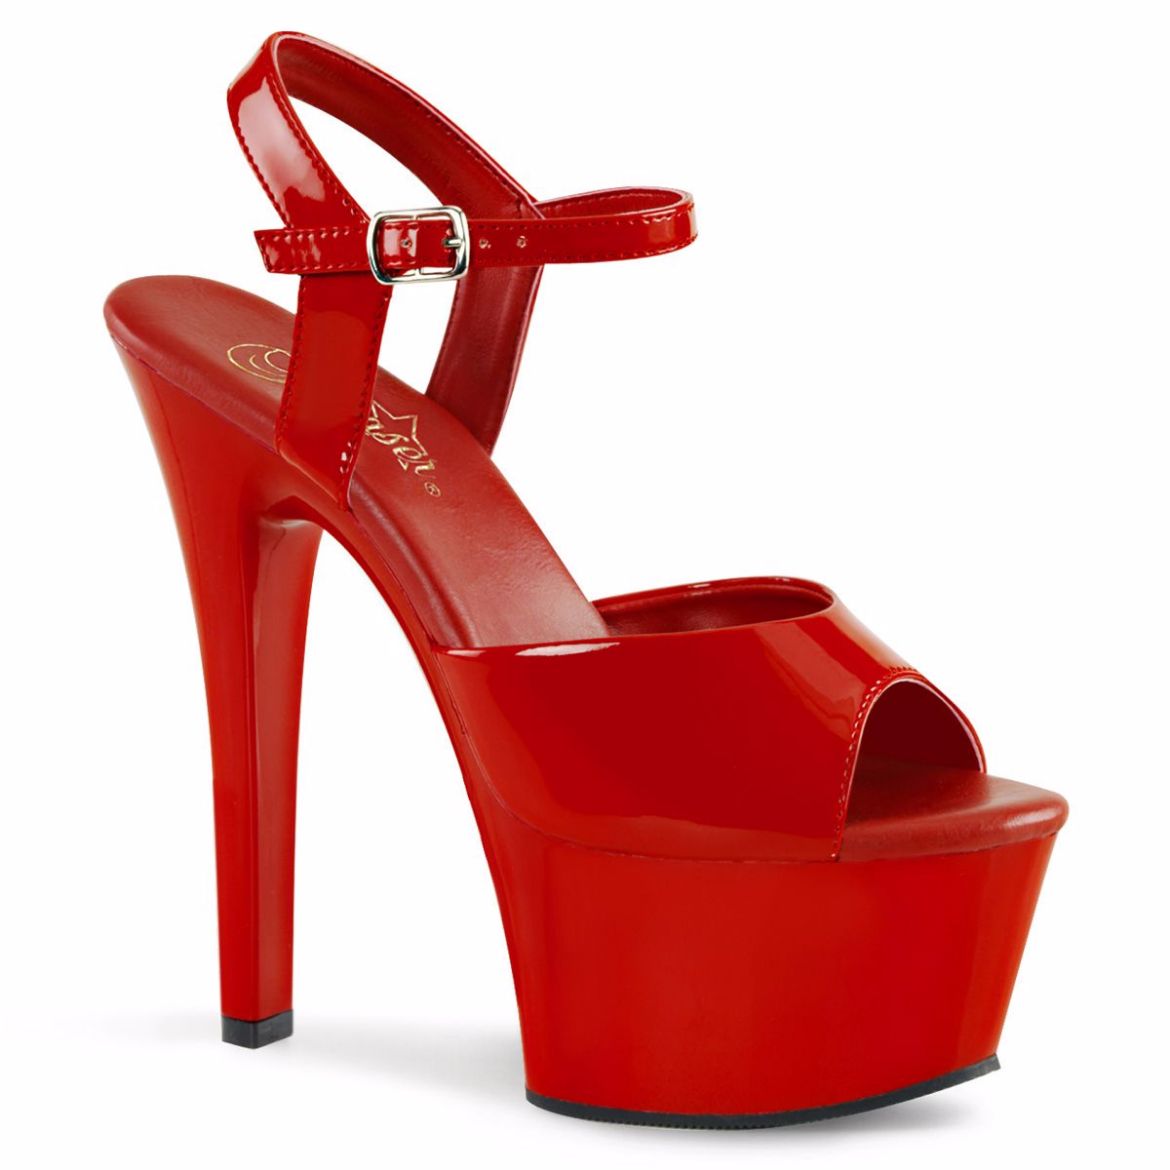 Product image of Pleaser Aspire-609 Red Patent/Red, 6 inch (15.2 cm) Heel, 2 1/4 inch (5.7 cm) Platform Sandal Shoes